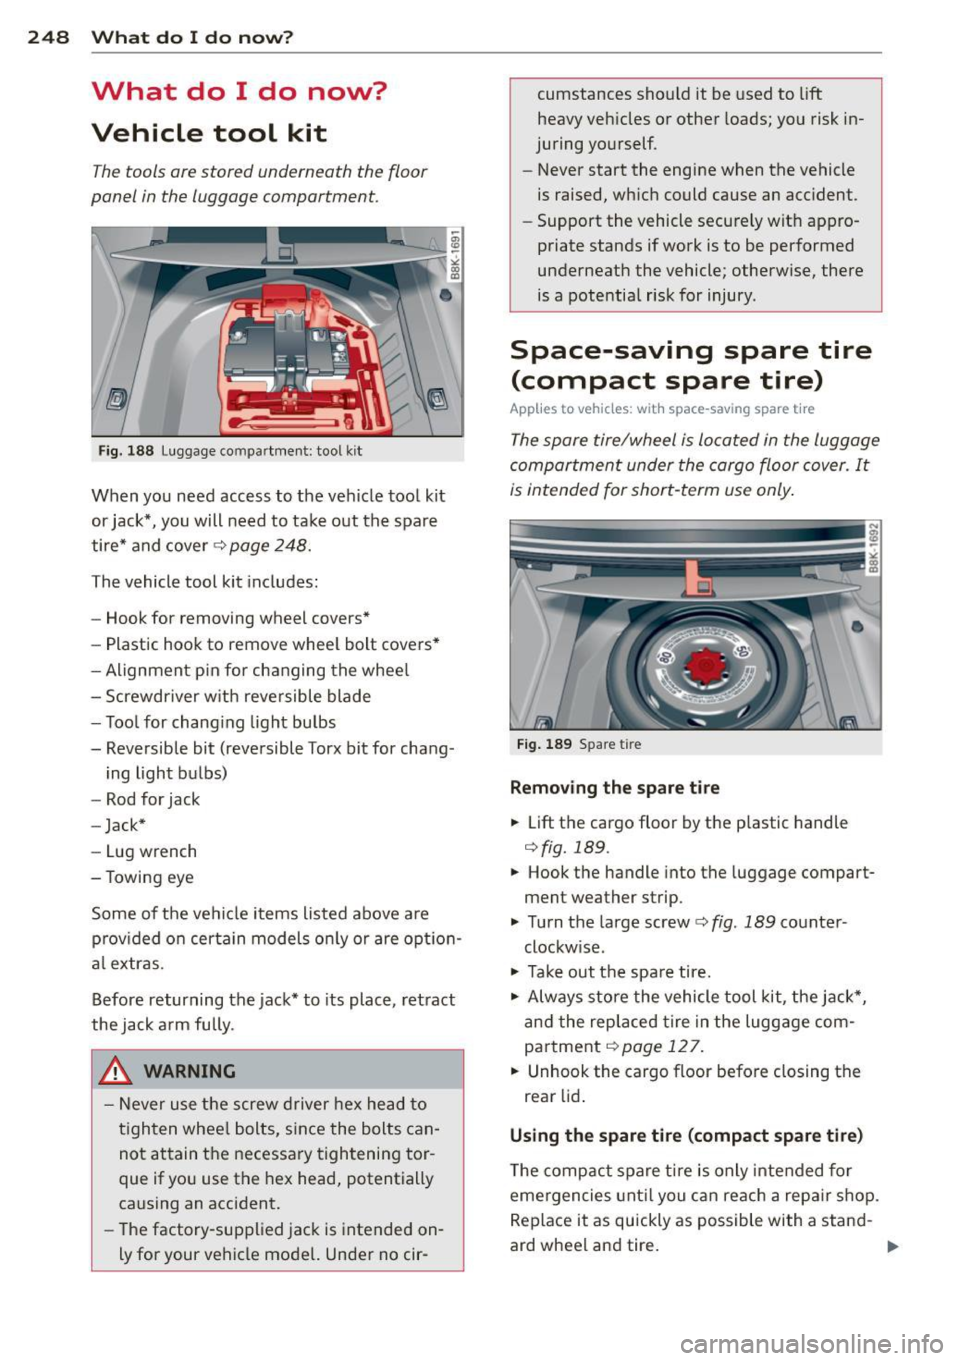 AUDI A5 CABRIOLET 2013  Owners Manual 248  What  do  I  do  now? 
What  do  I  do  now? 
Vehicle  tool  kit 
The tools  ore stored  underneath  the floor 
panel  in the  luggage  comportment. 
Fig. 188 luggage  compartment:  tool kit 
Whe